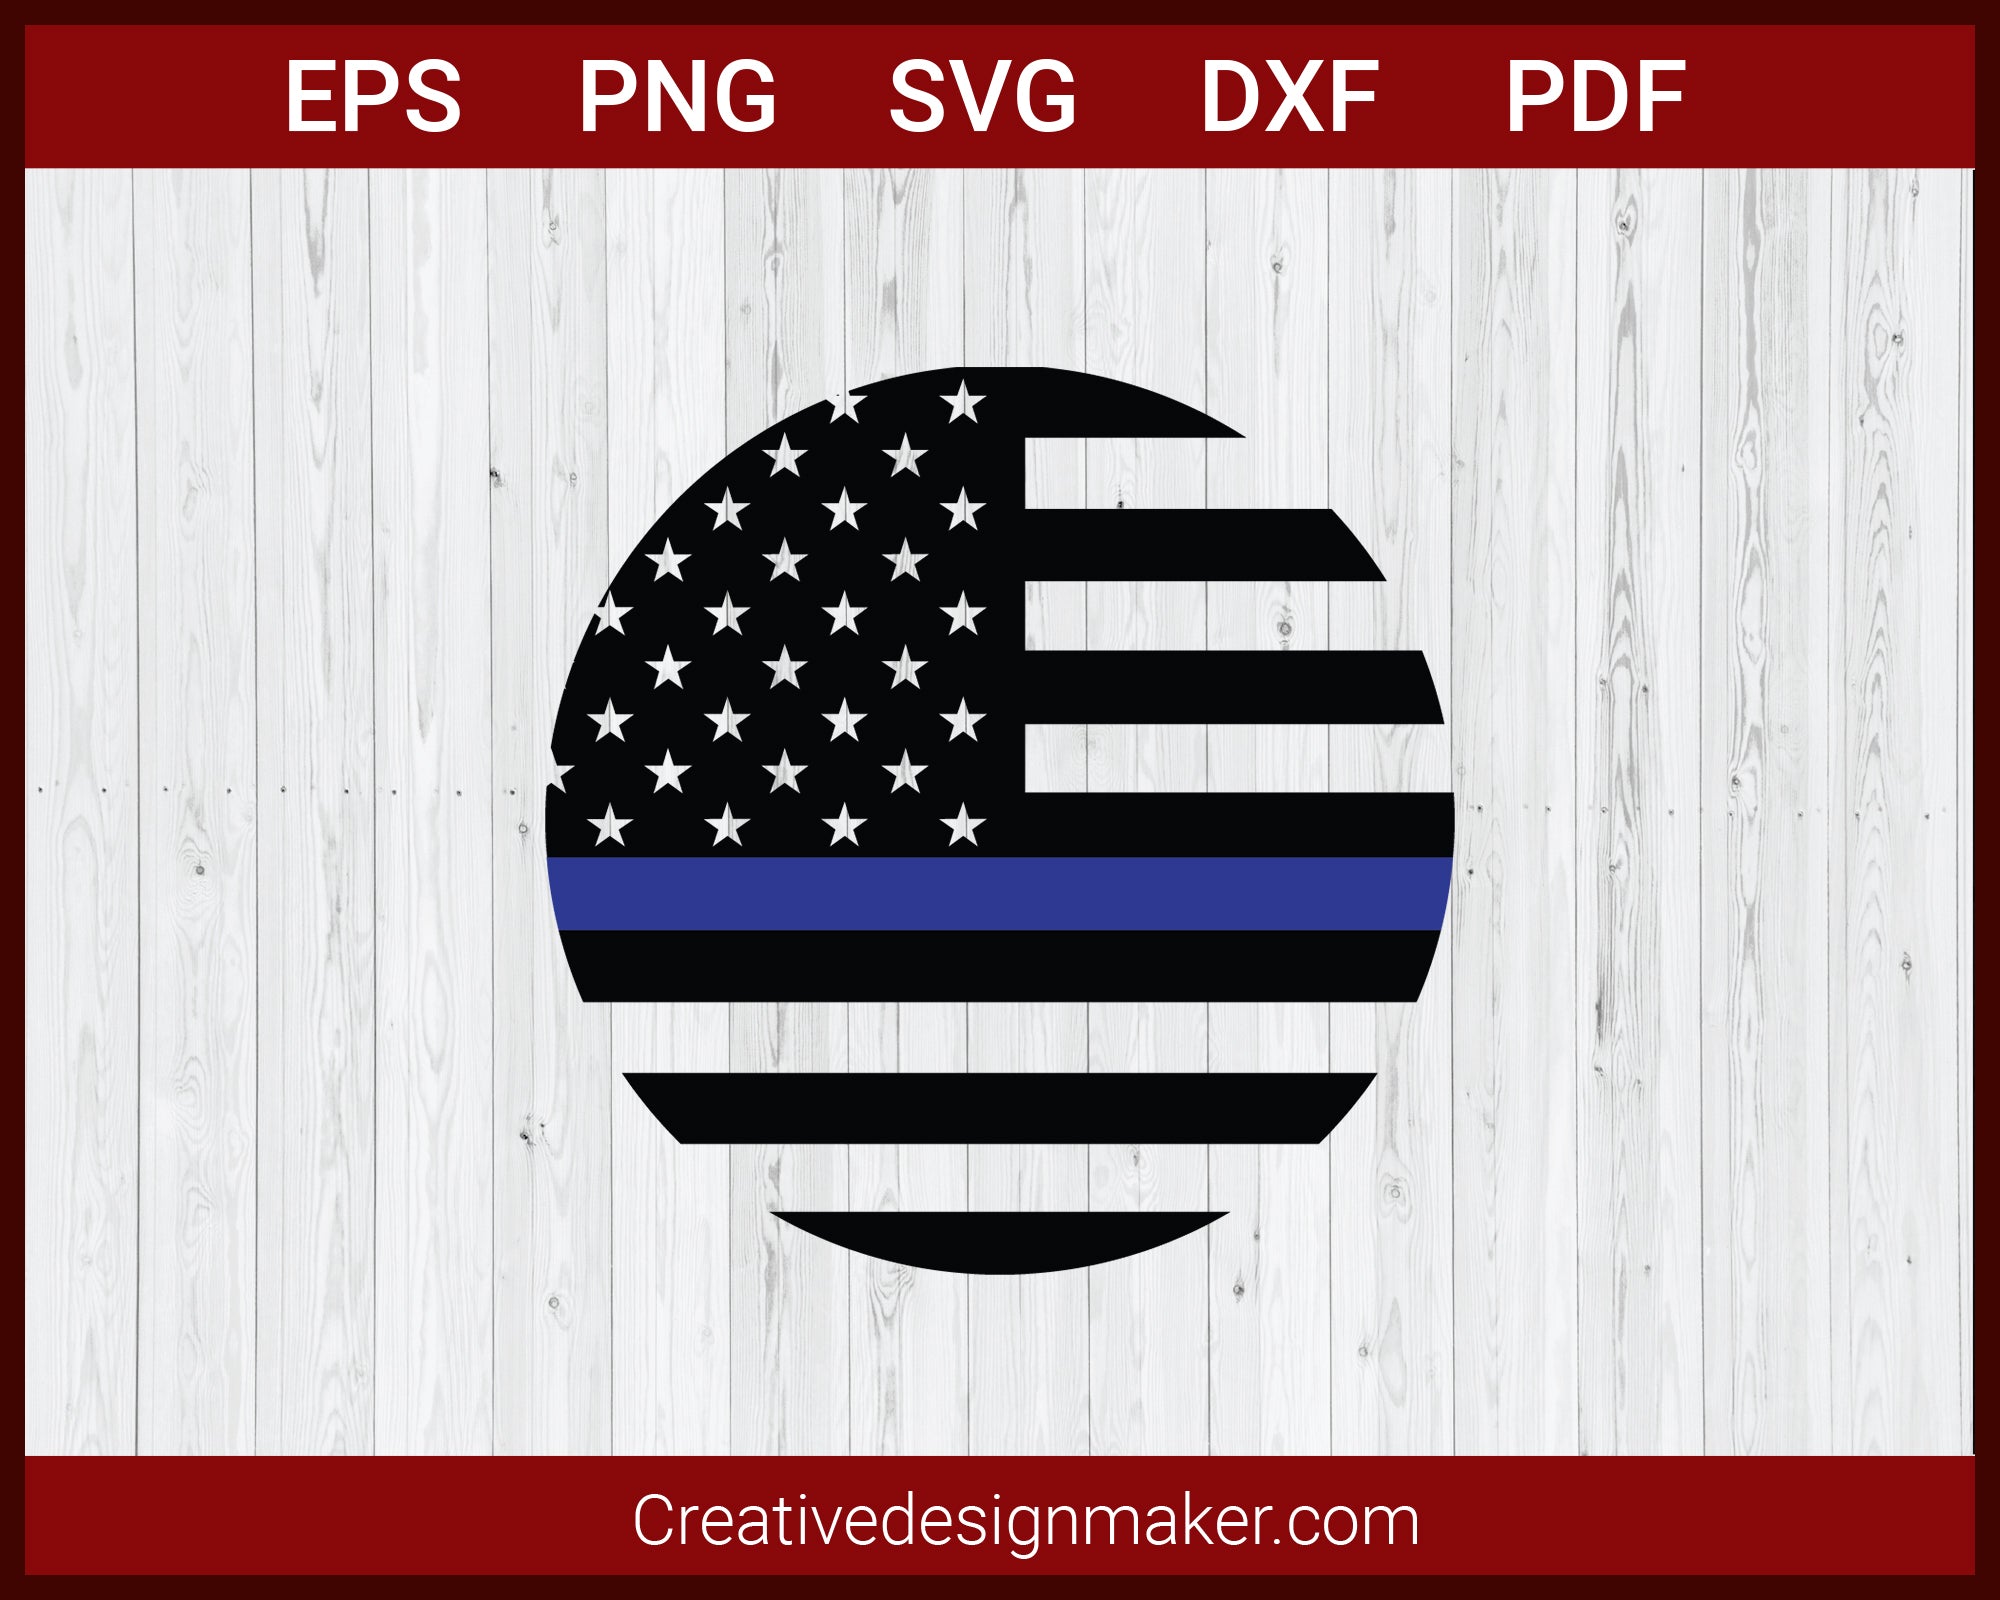 Thin Blue Line United States Flag Police SVG Cricut Silhouette DXF PNG EPS Cut File